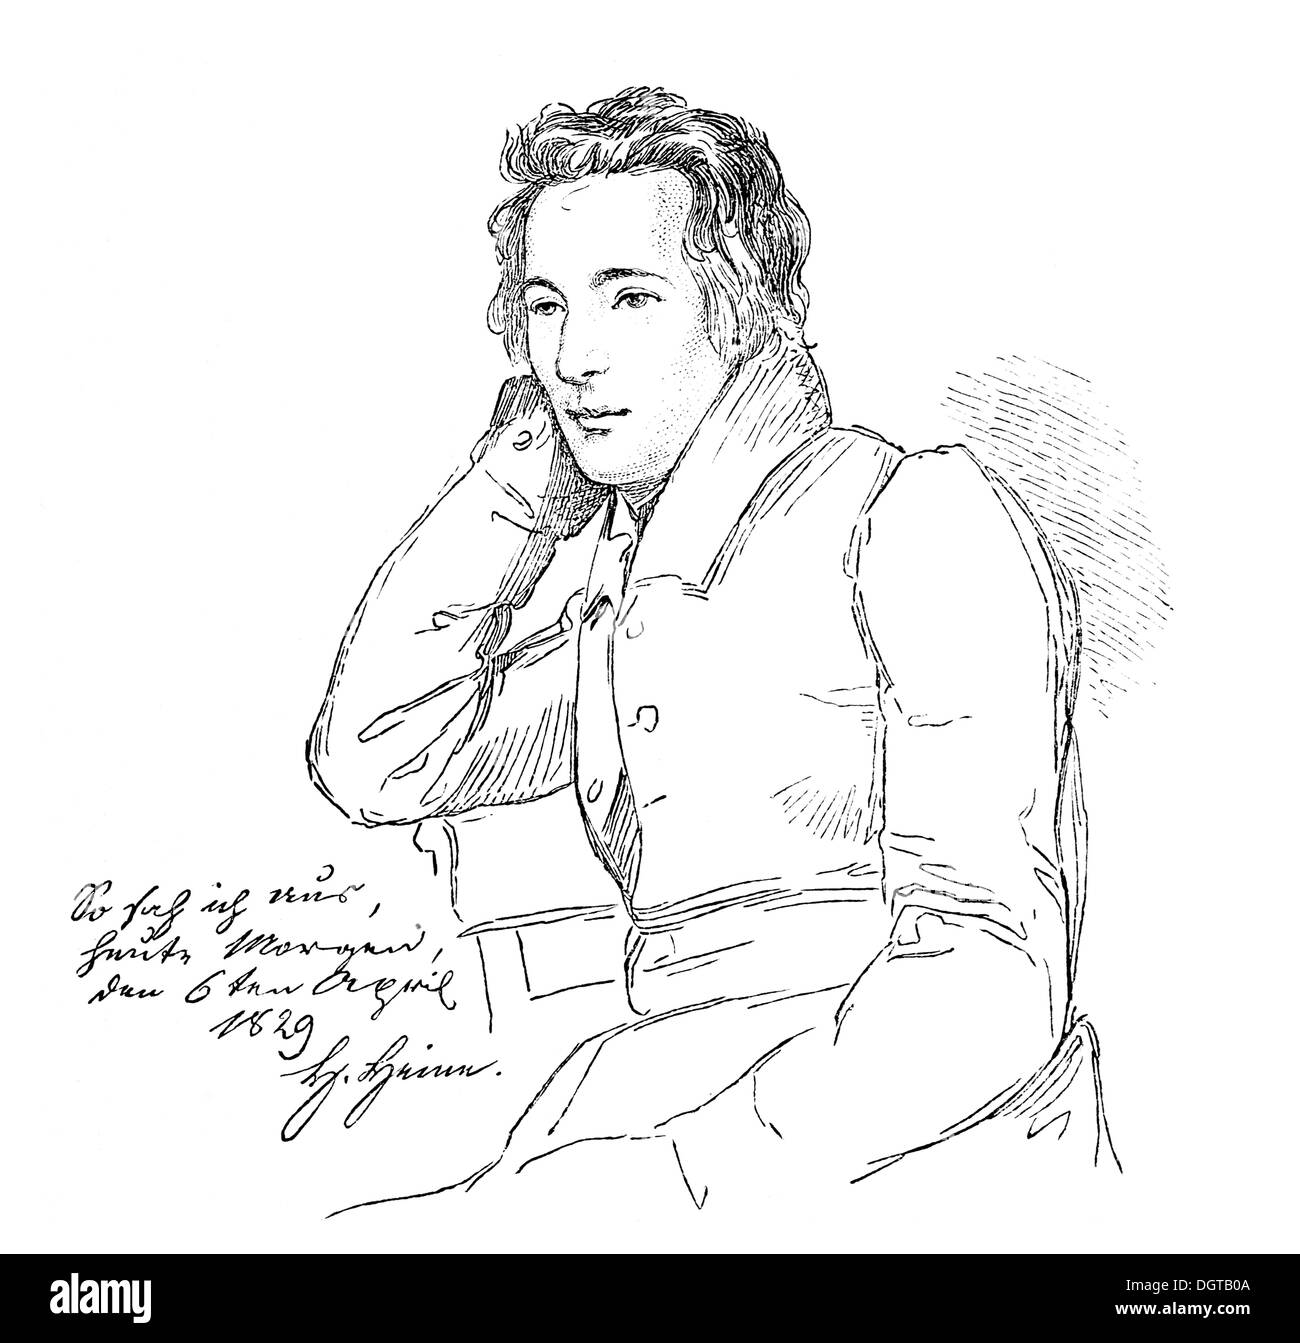 Portrait of Heinrich Heine at age 29, drawn by Franz Kugler, historic illustration from History of German Literature from 1885 Stock Photo